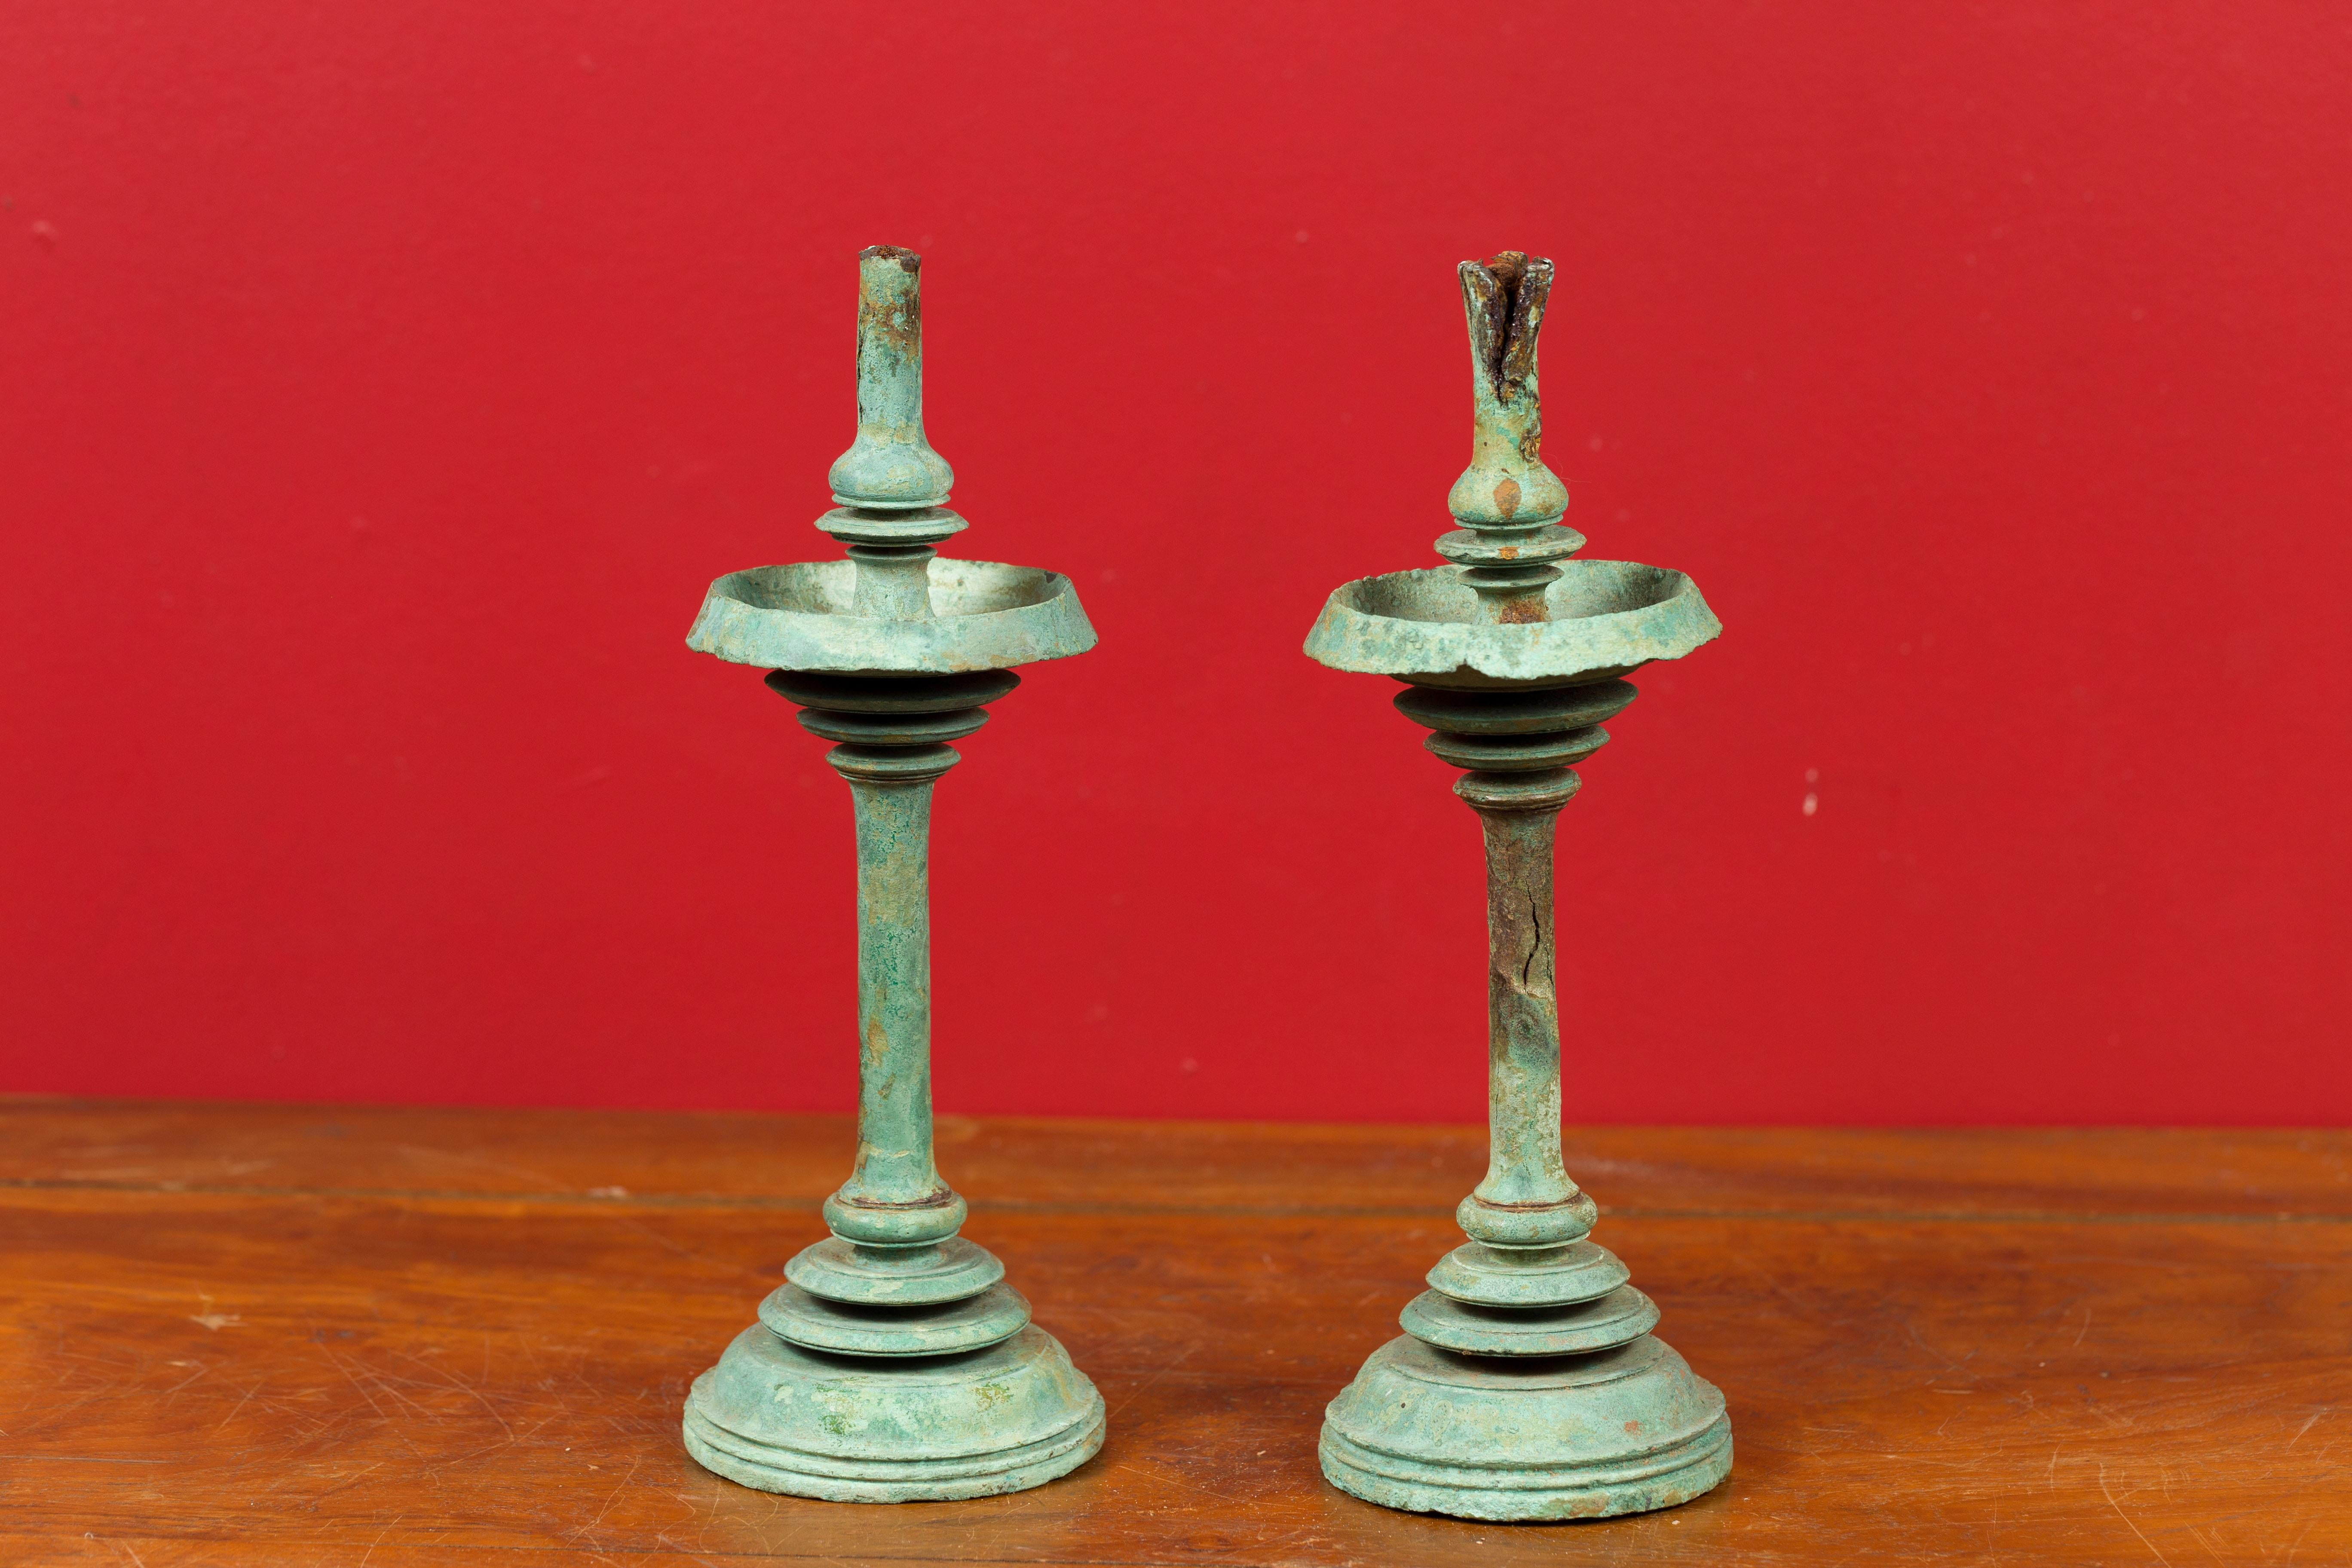 Pair of Angkor-Wat 12th Century Bronze Temple Oil Lamps from the Khmer Empire 1